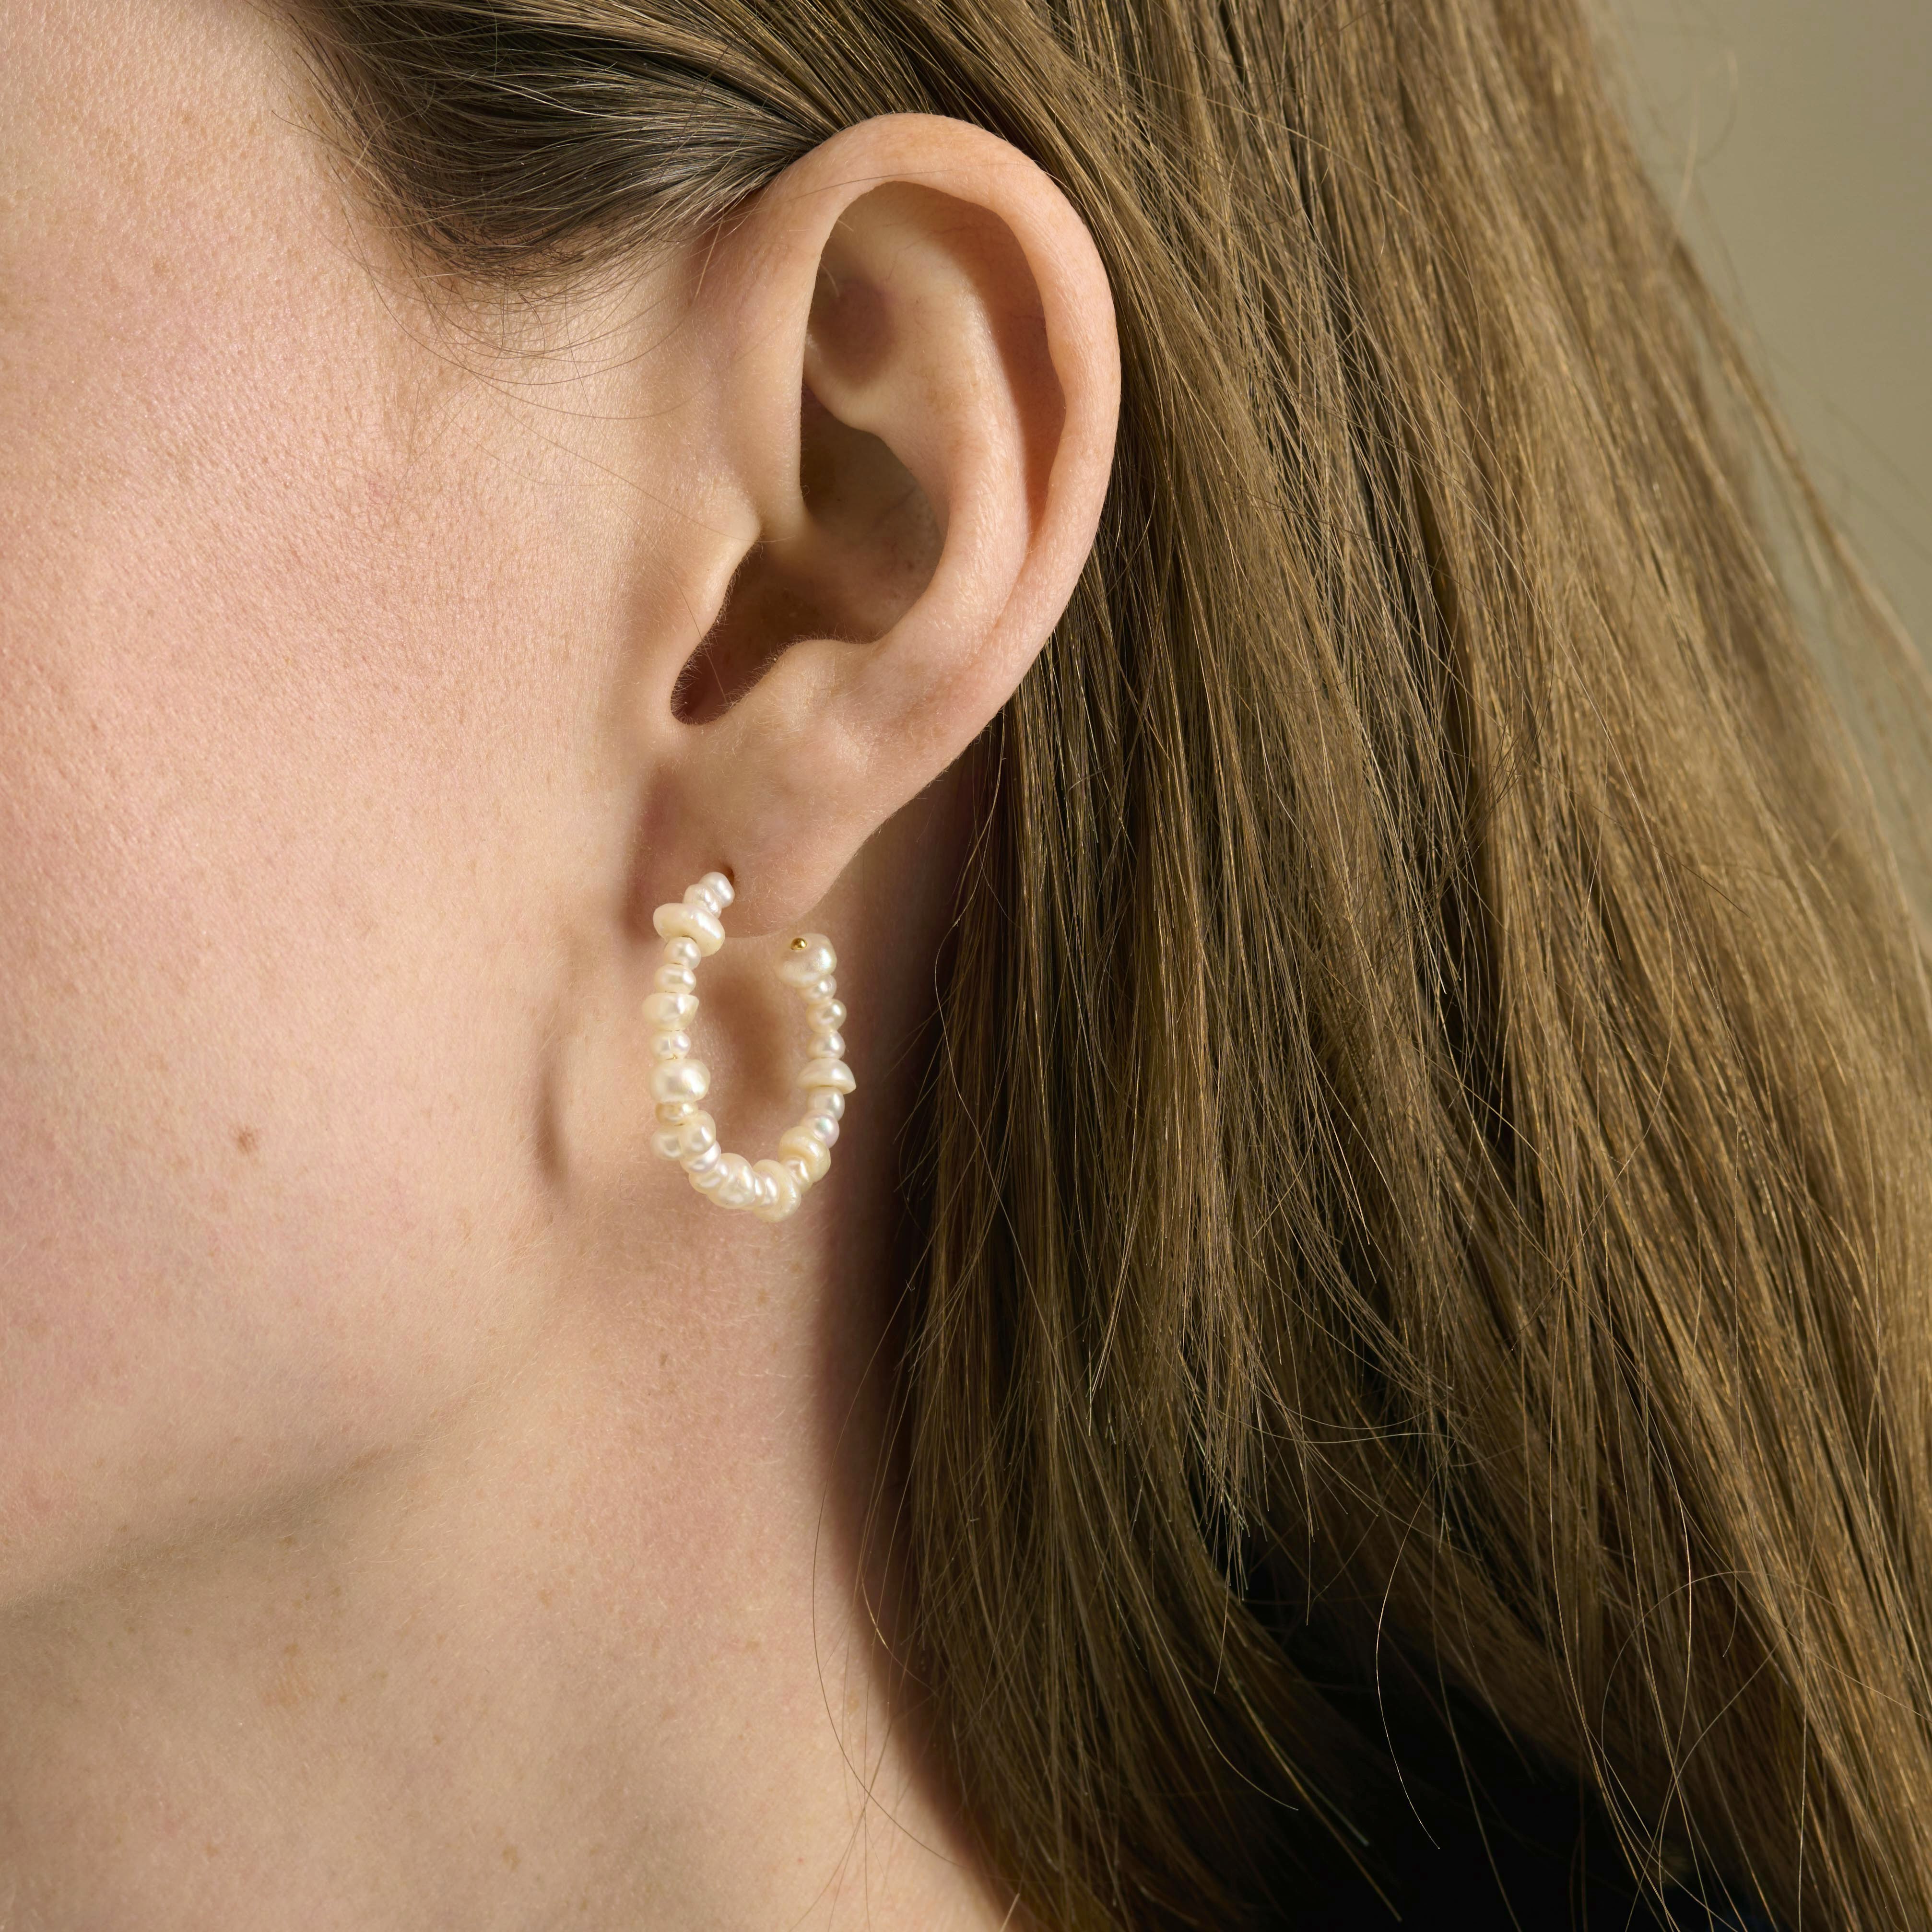 Liberty Hoops from Pernille Corydon in Silver Sterling 925